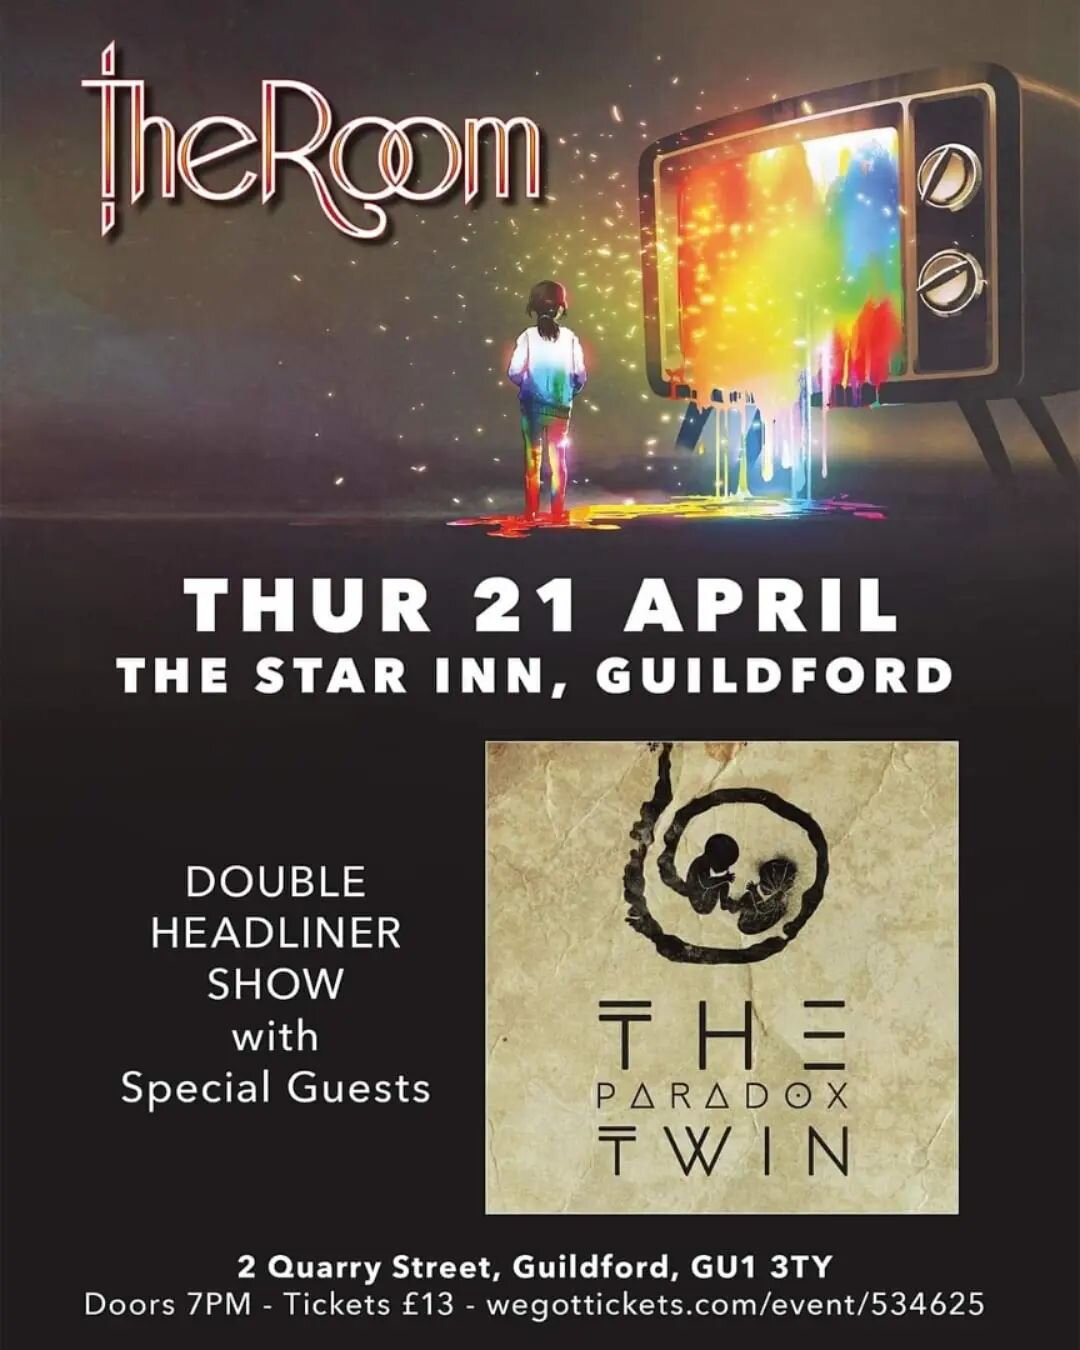 Do you live near Guildford?

Do you want to see some quality progressive rock?

If so, there are probably lots of excellent gigs happening in the area. 

On the other hand, if you you want to see one of MY bands, I guess you could come to this...